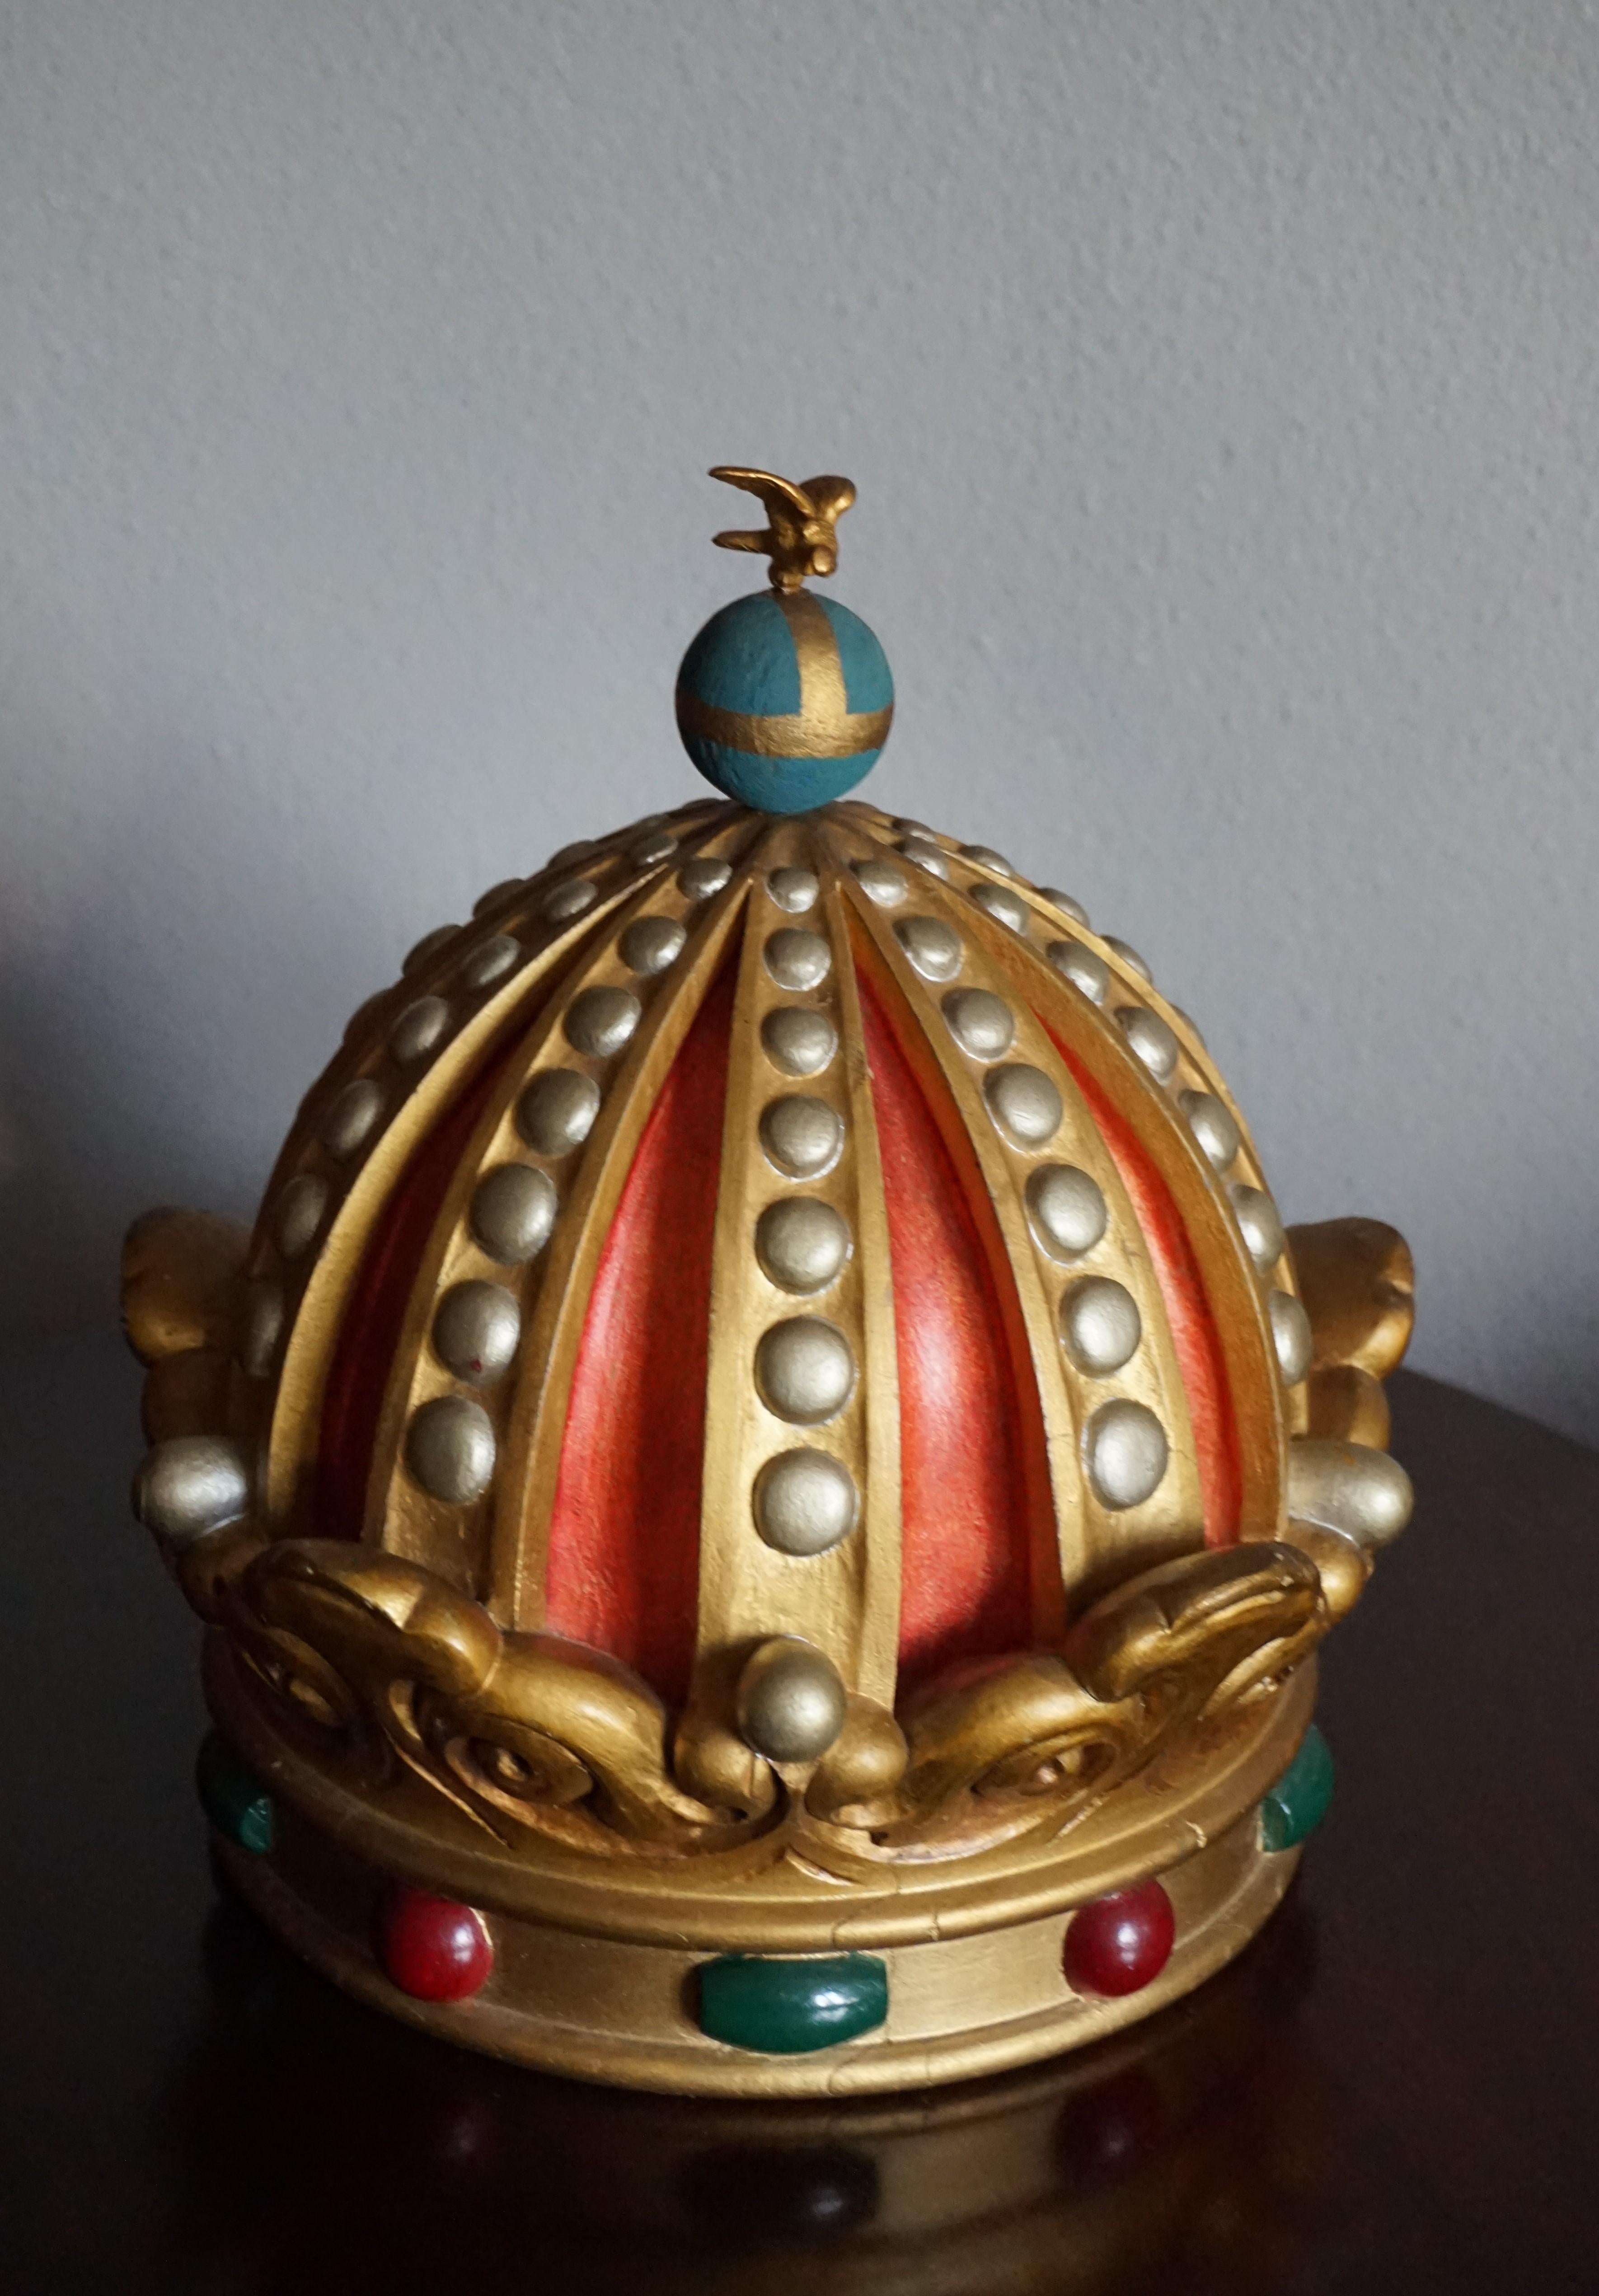 One of a kind, Gothic church relic.

In the summer of 2019 we purchased a large part of a collection of a former restorer (and avid collector) of antique church relics. This early 20th century, hand carved, gilt and hand painted wooden crown was